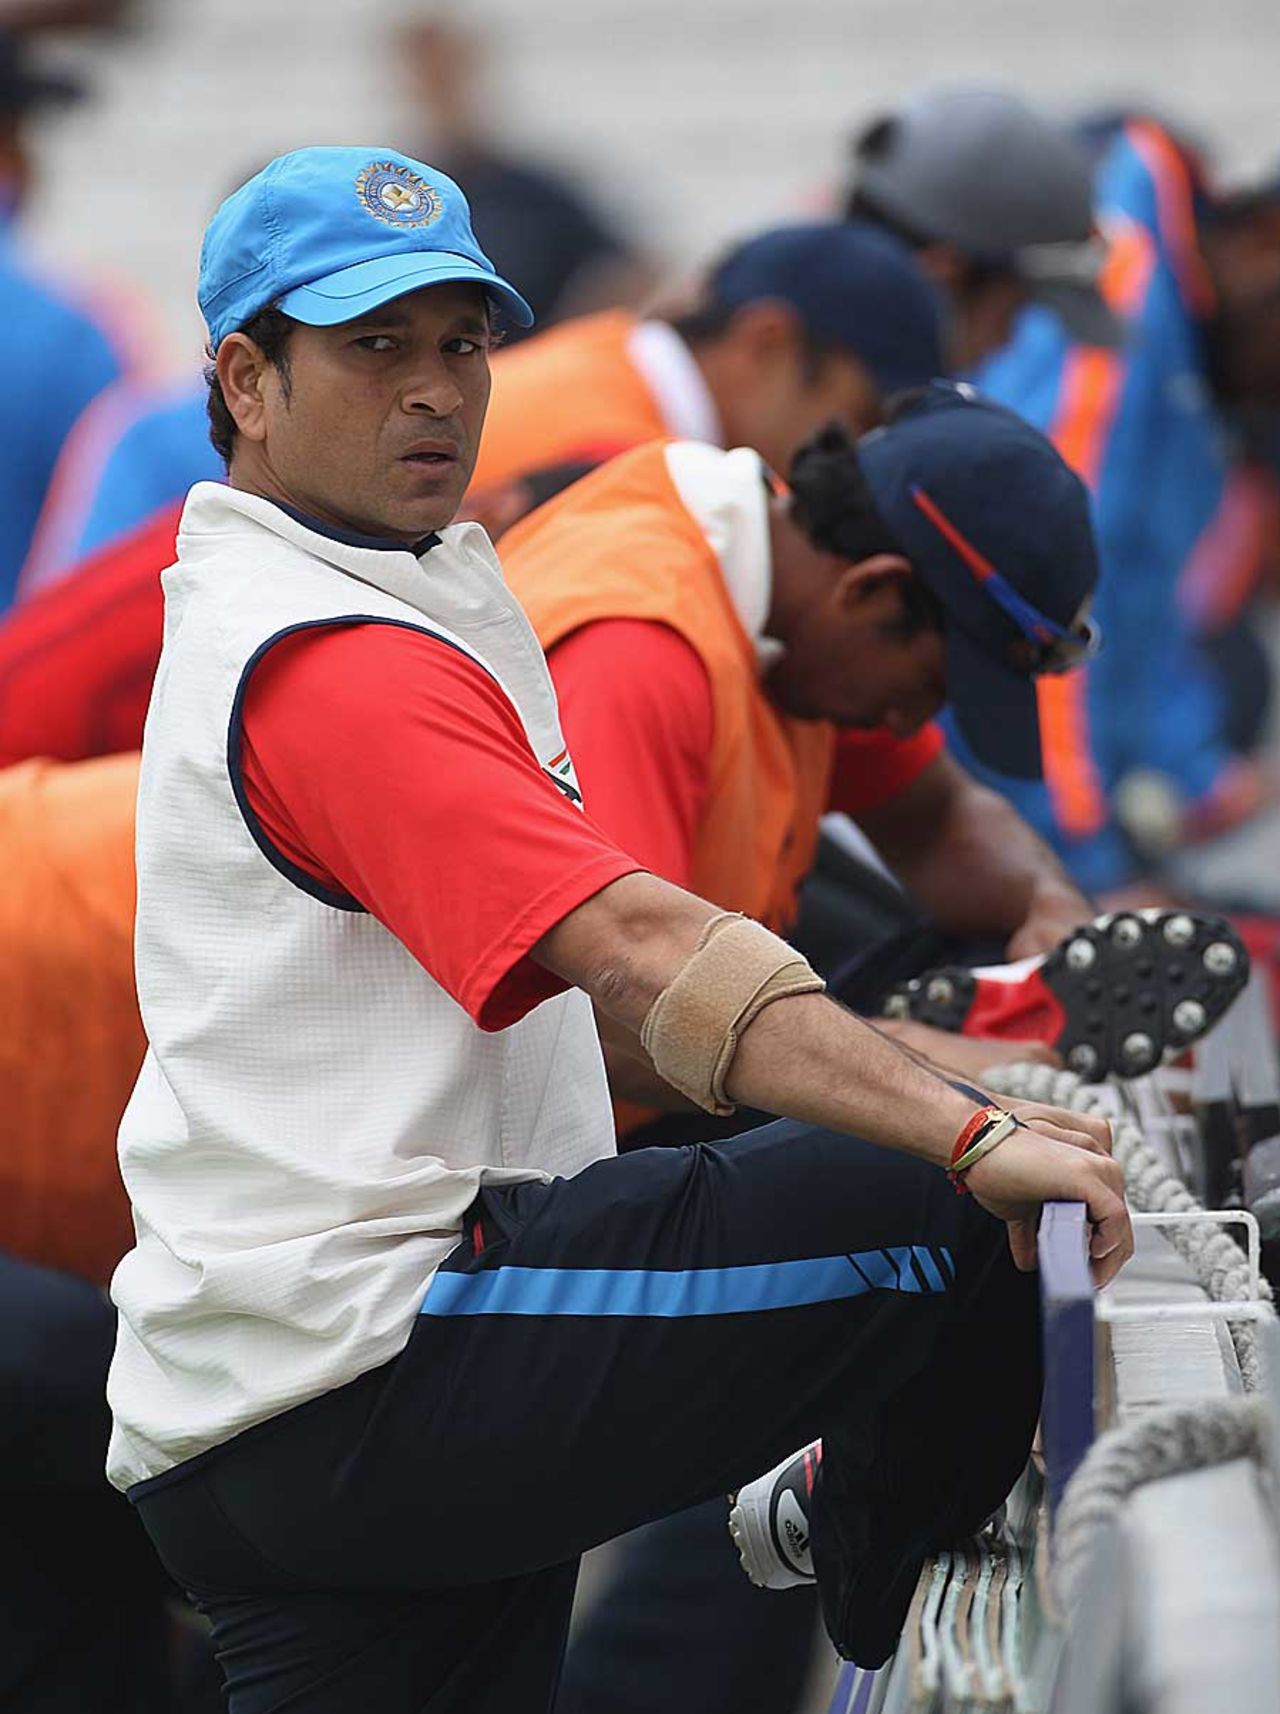 Sachin Tendulkar stretches during a practice session, The Oval, August 16, 2011